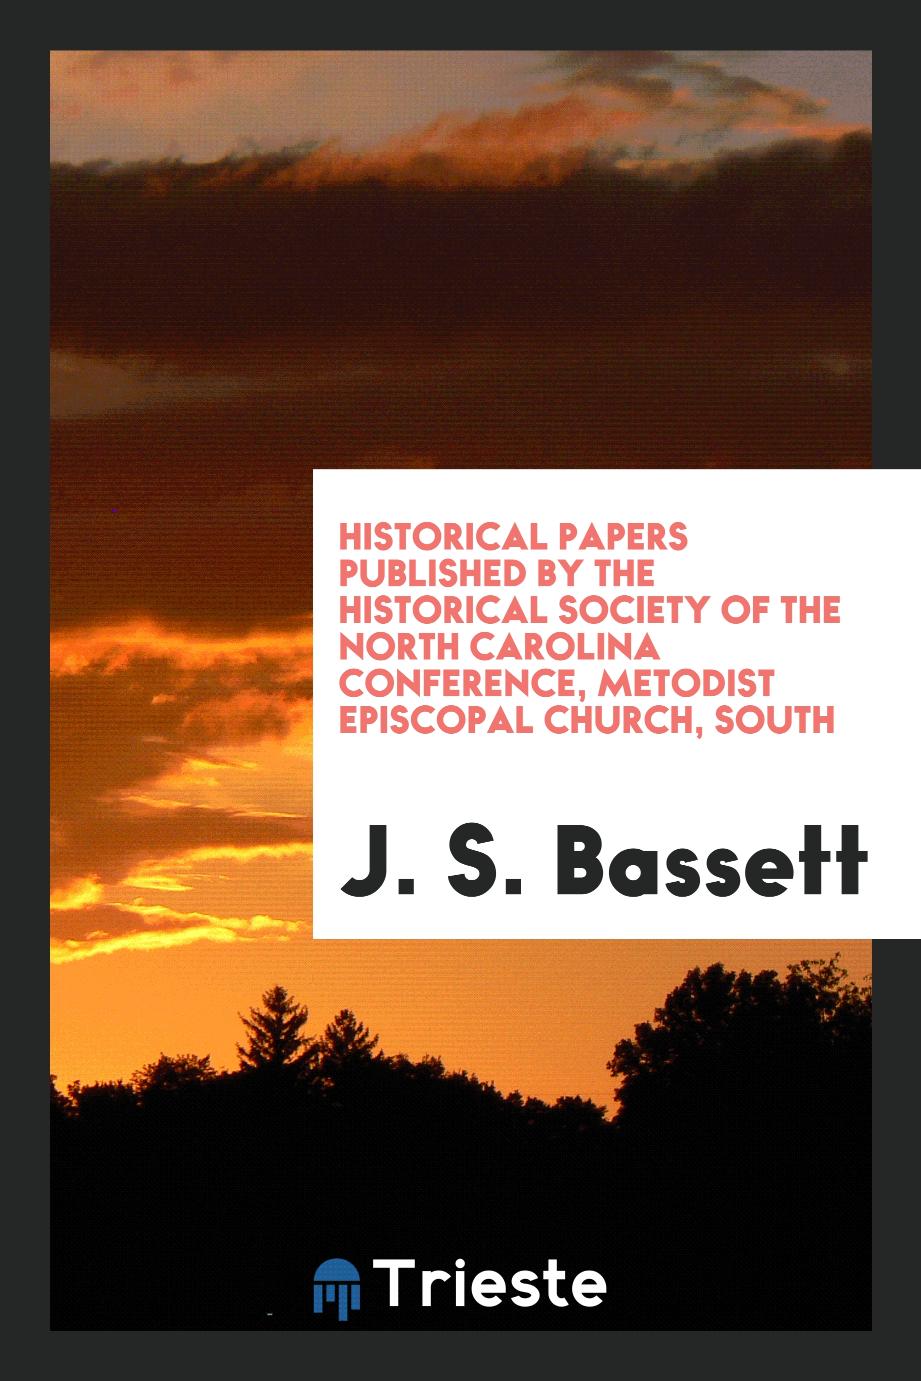 Historical Papers Published by the Historical Society of the North Carolina Conference, Metodist Episcopal Church, South